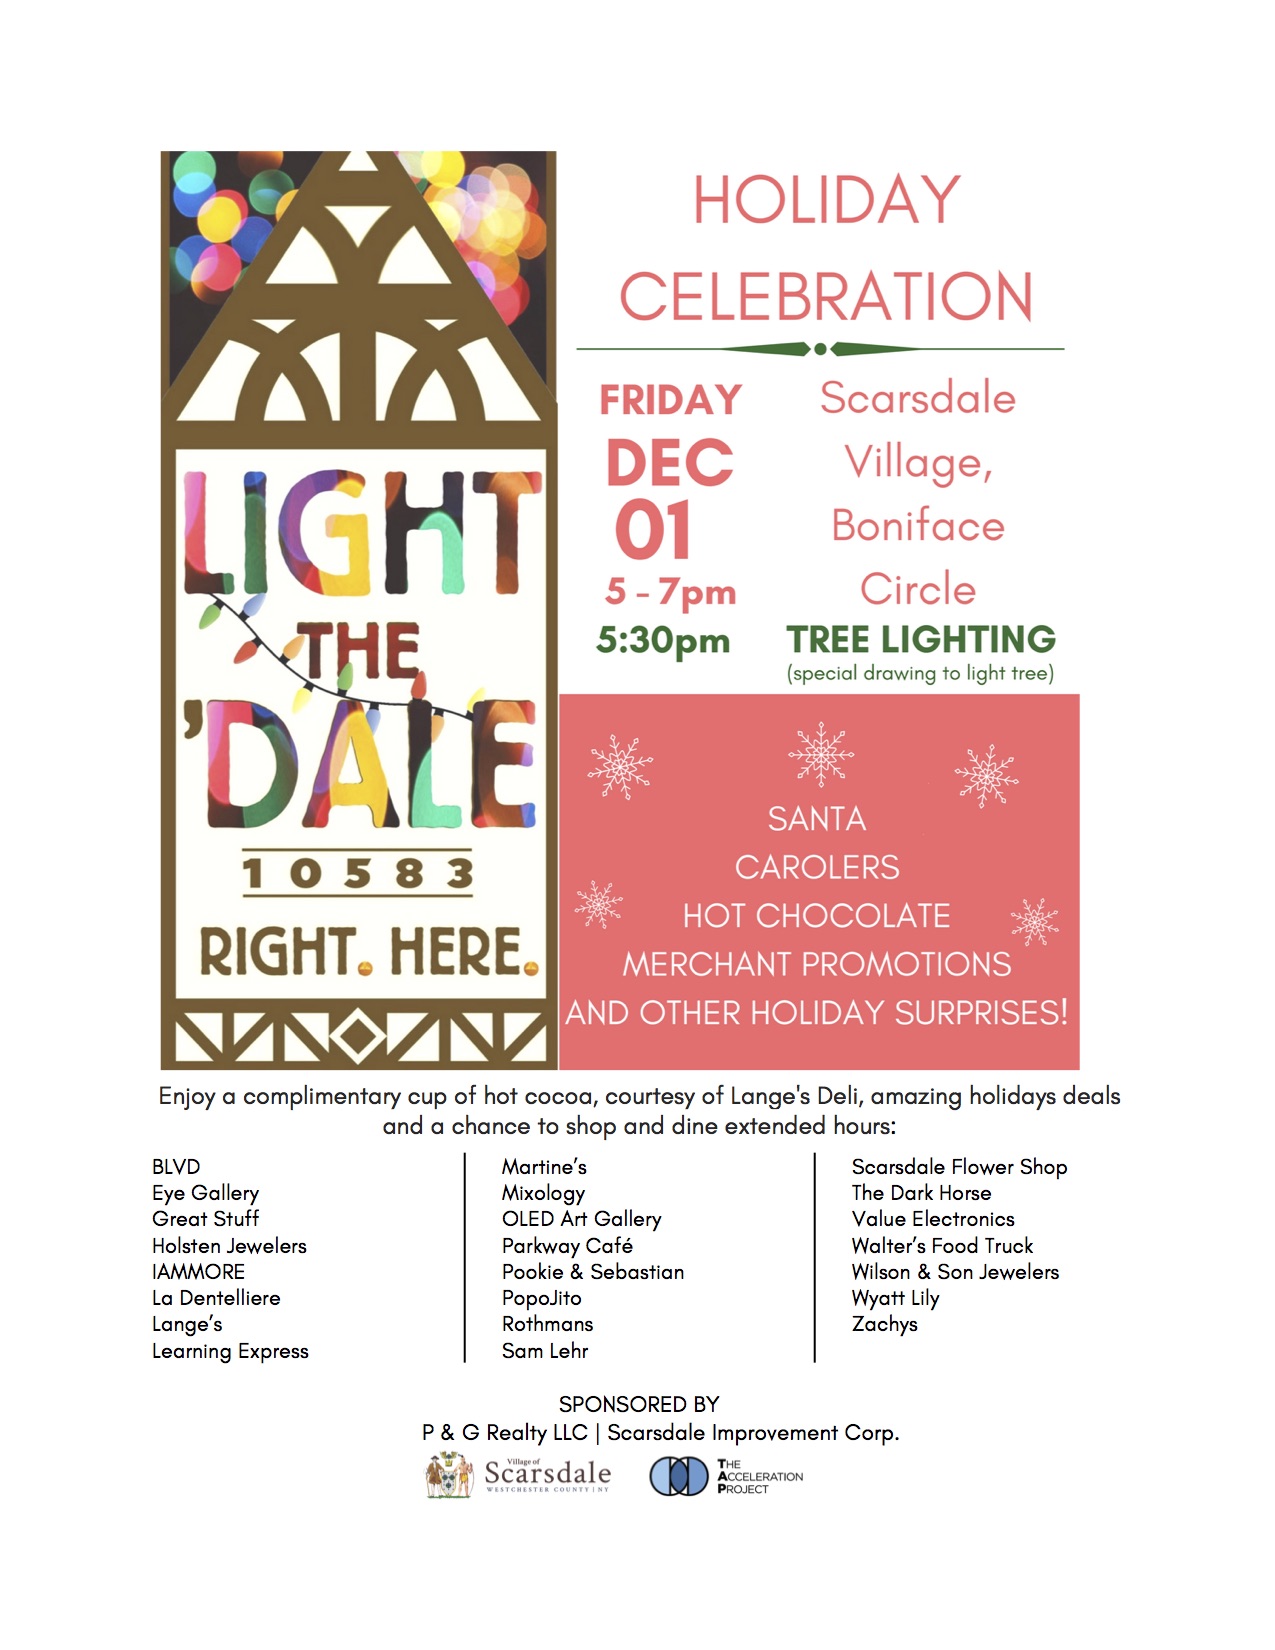 Scarsdale's Annual Holiday and Tree Lighting Event To Take Place on